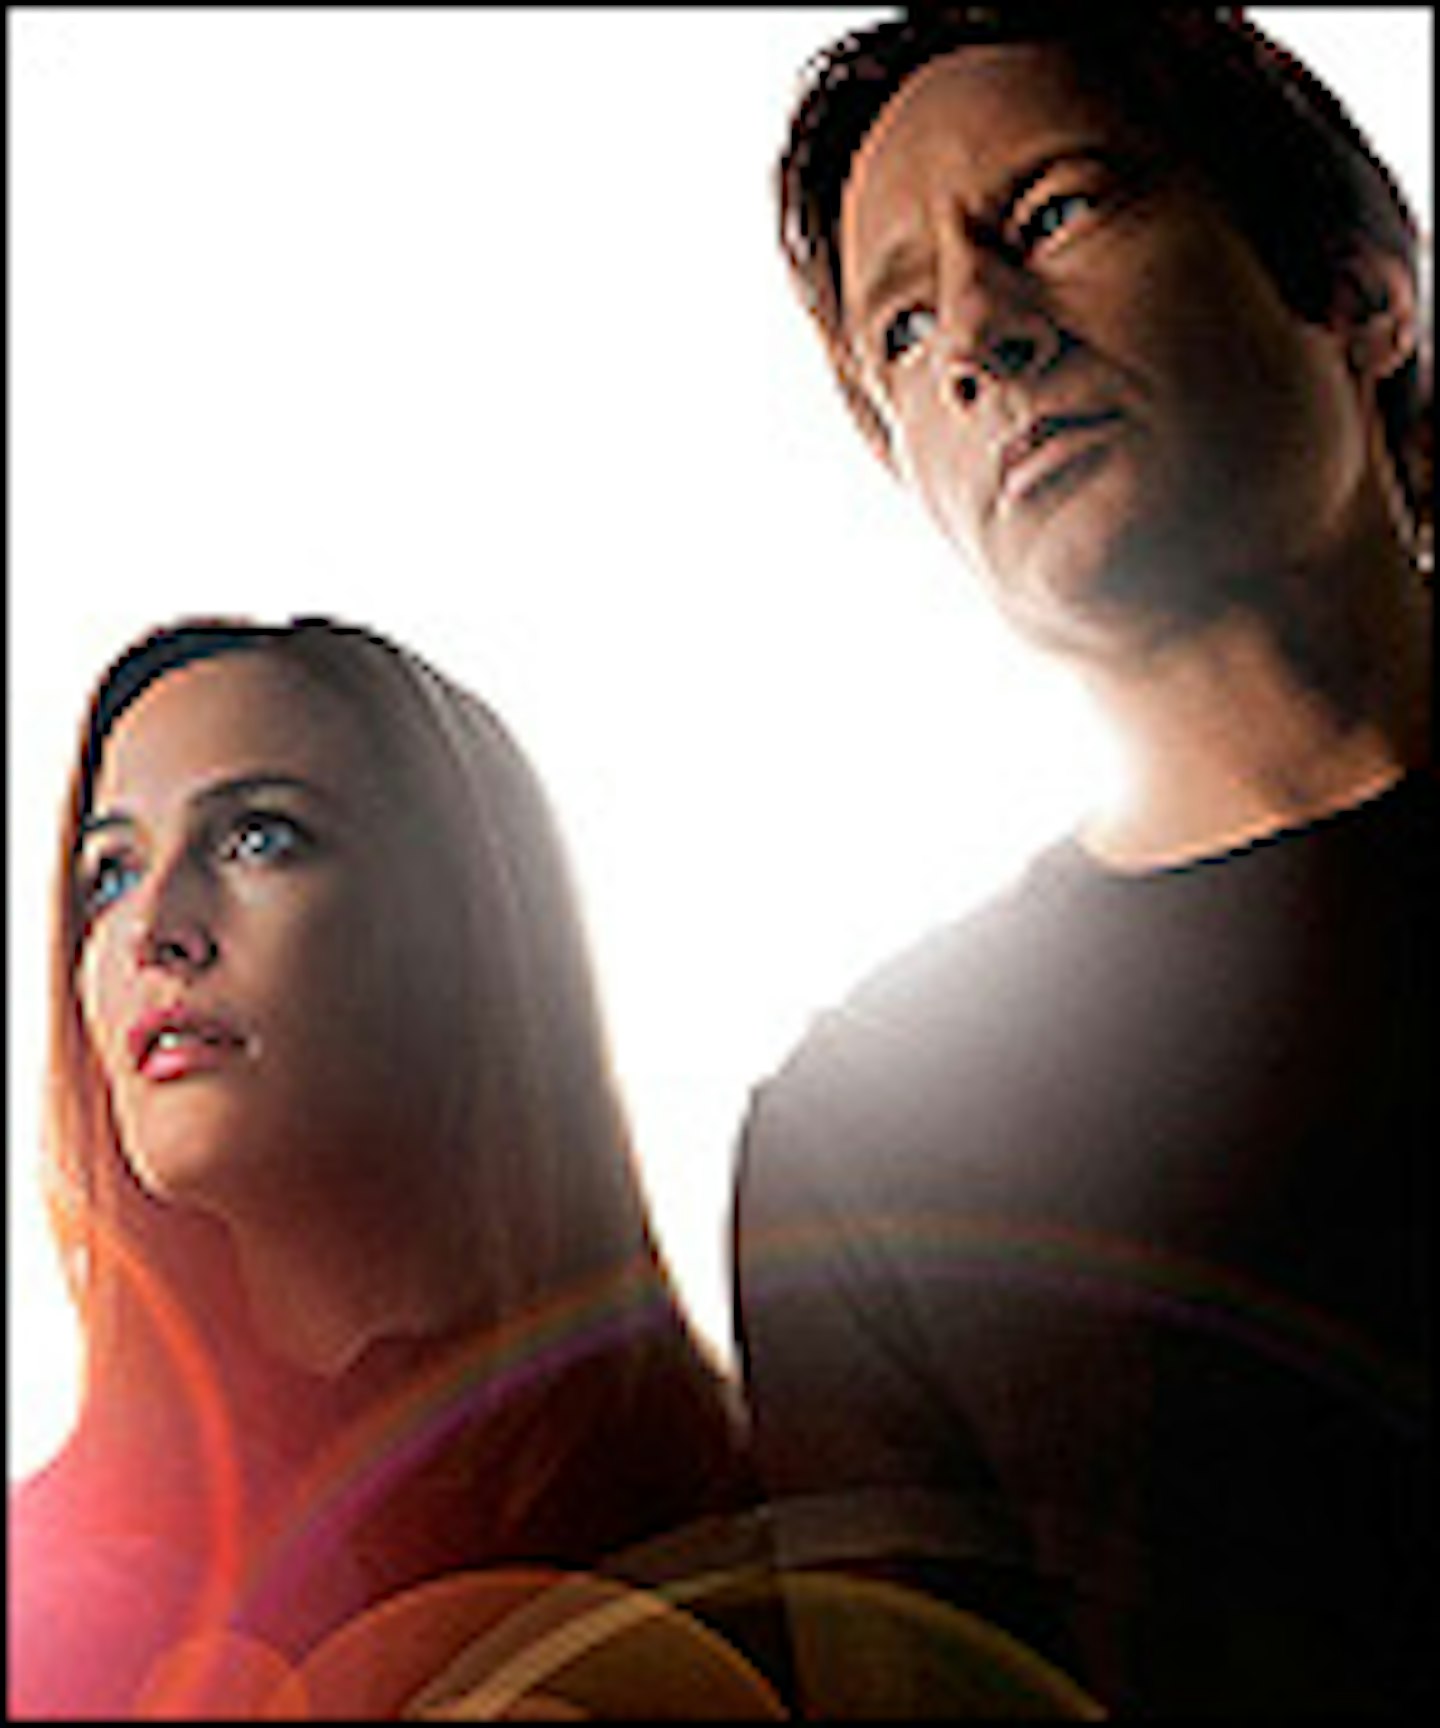 New Poster For The X-Files 2